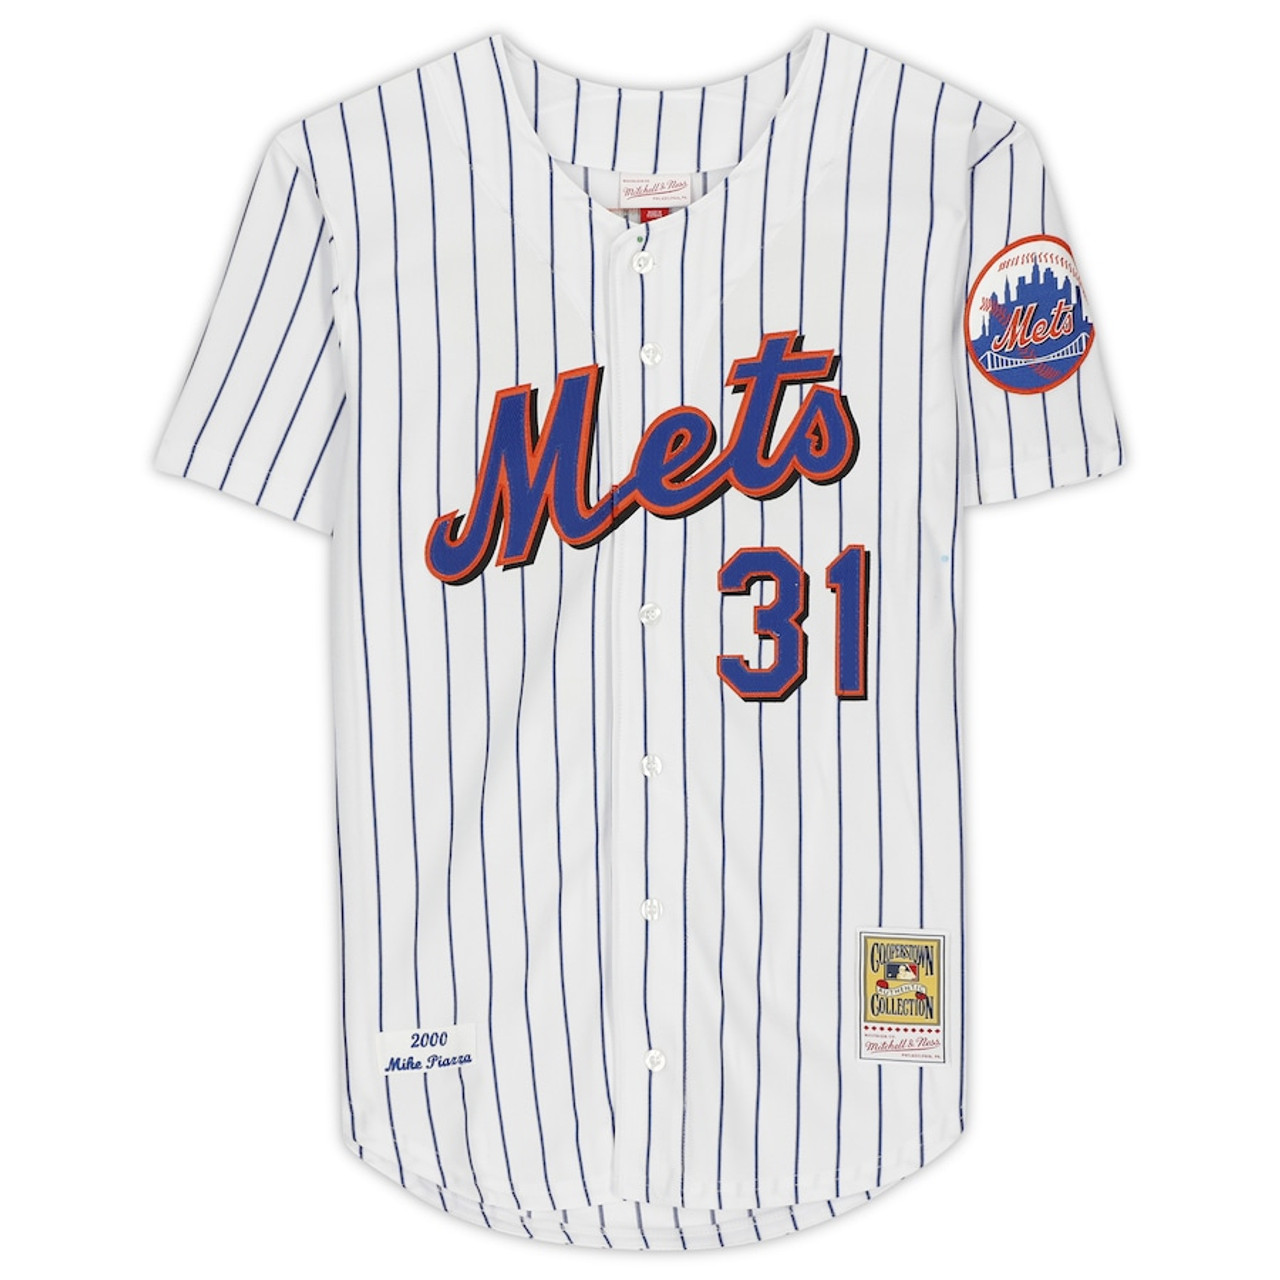 Majestic NY Mets mike piazza jersey ✌🏻🔥🖤 Size: xl/xxl Sold